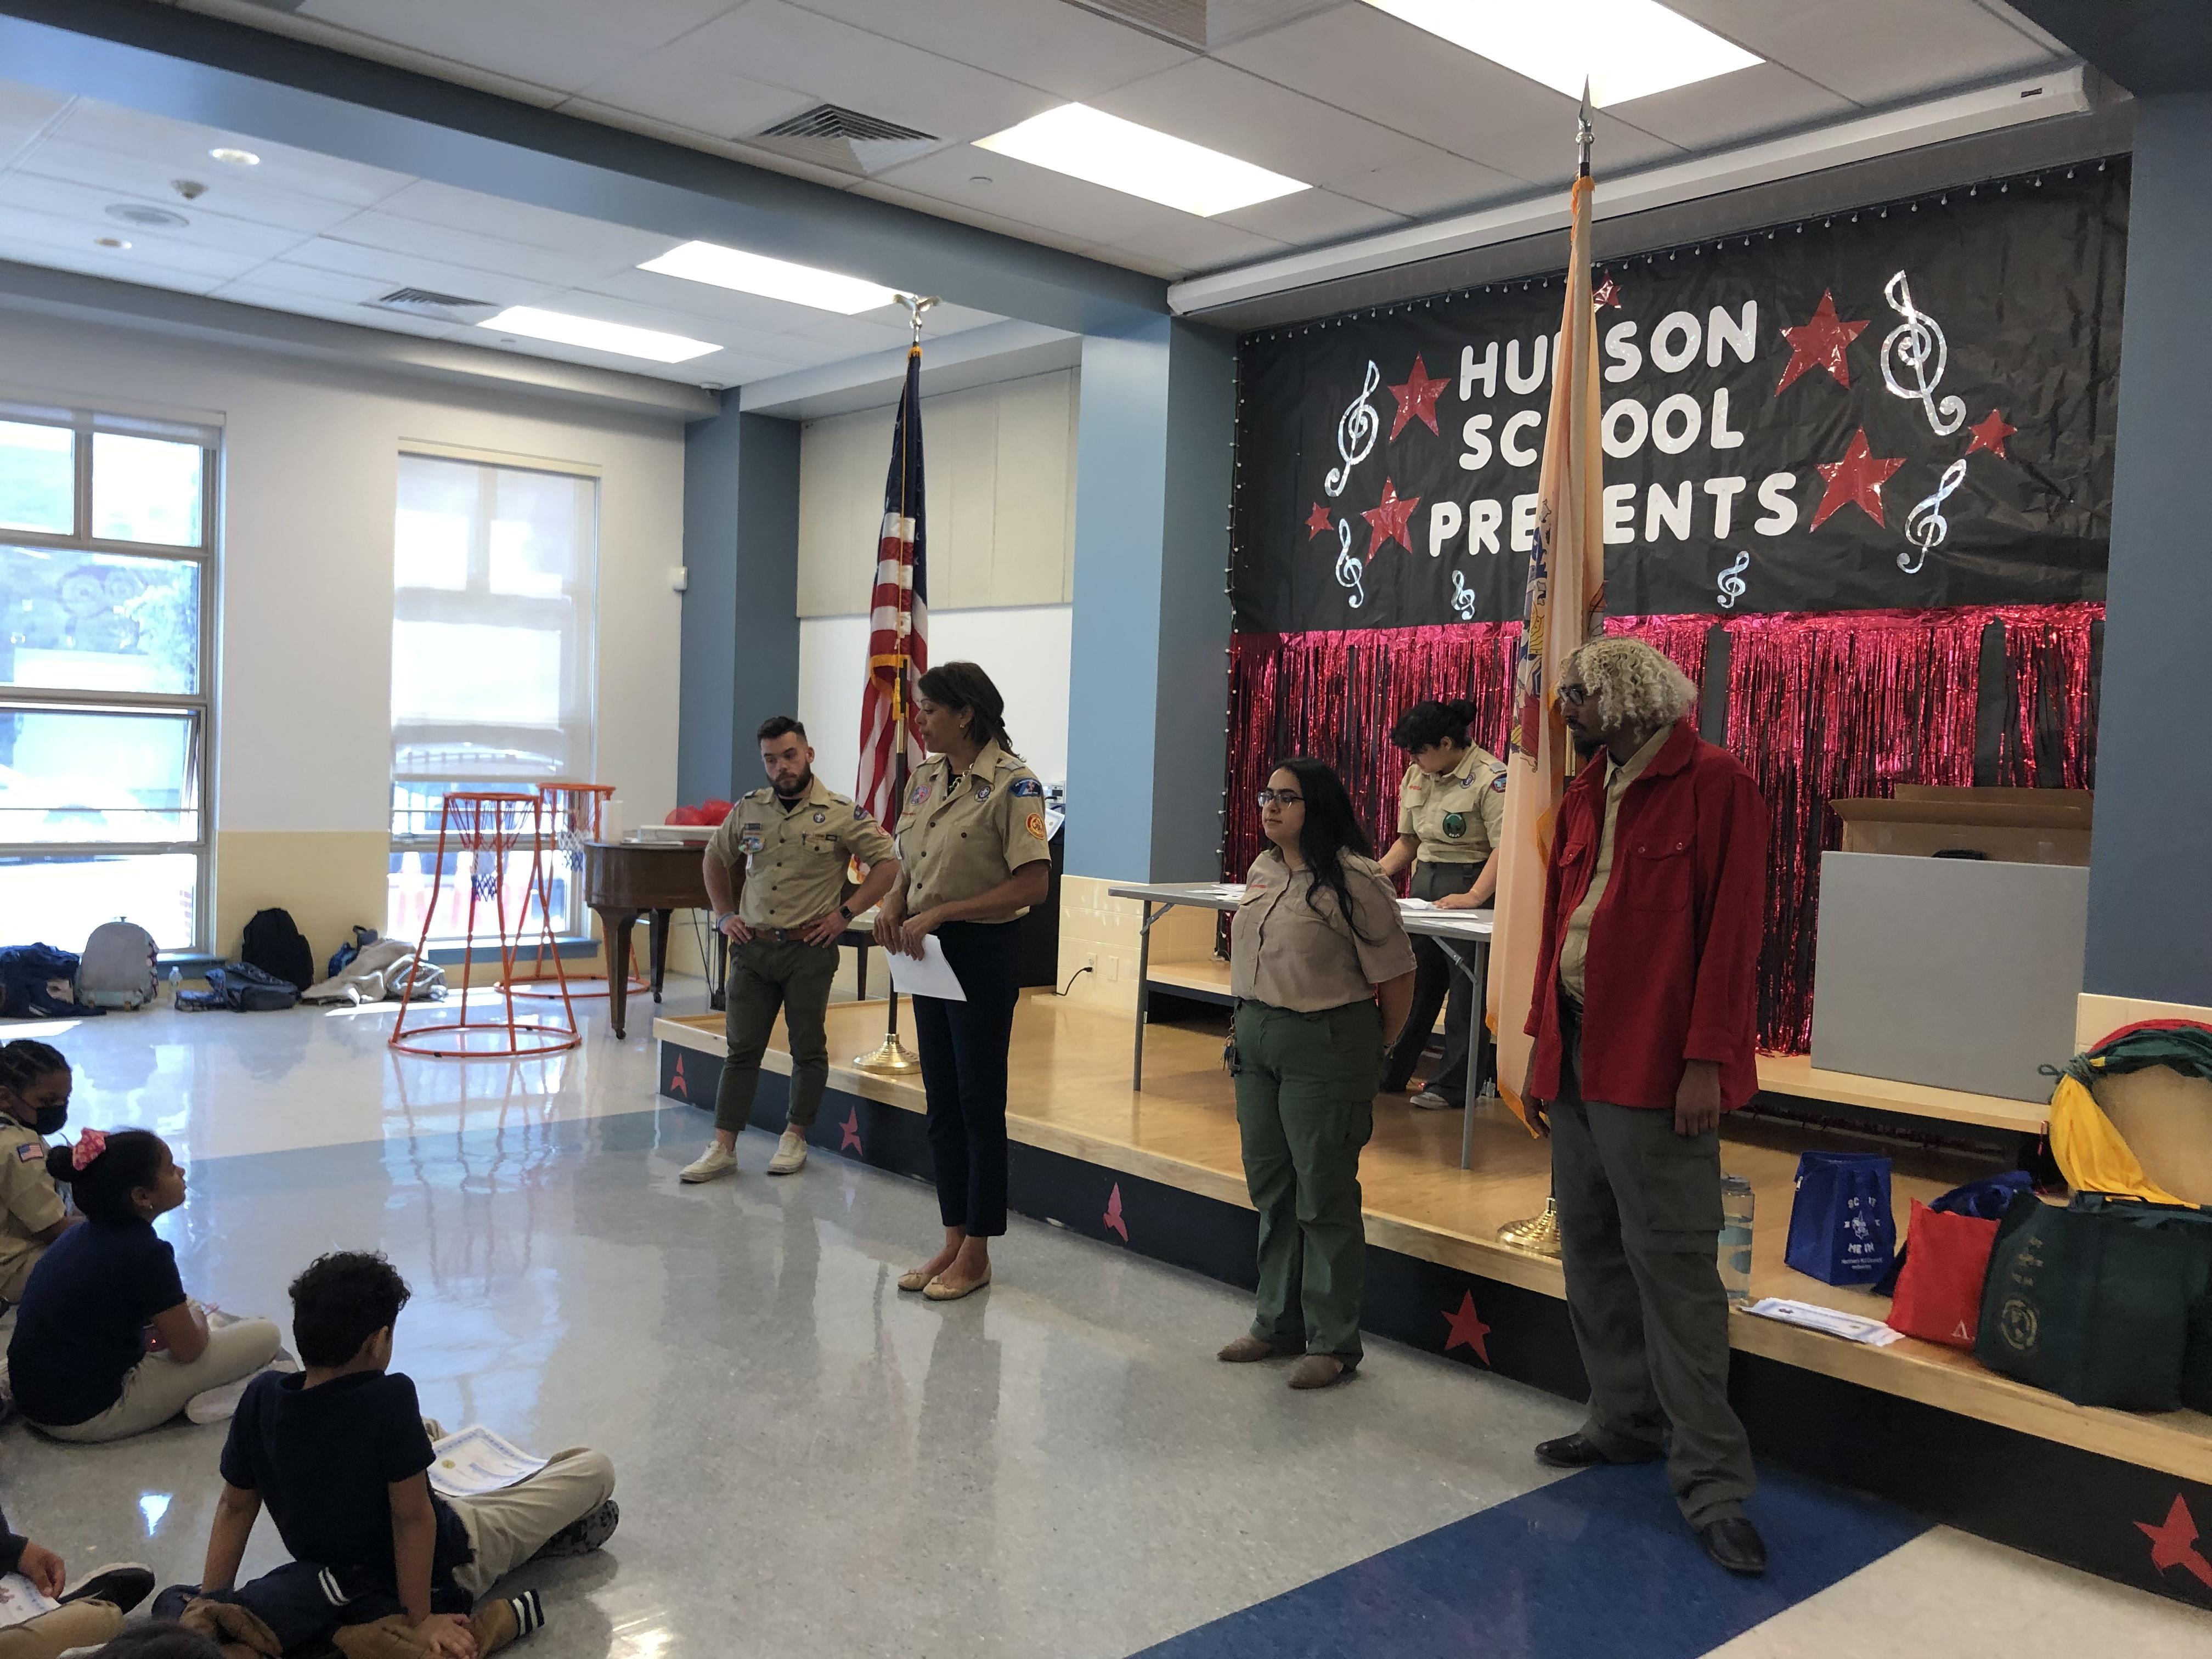 Cub Scouts Ceremony at Hudson School #5